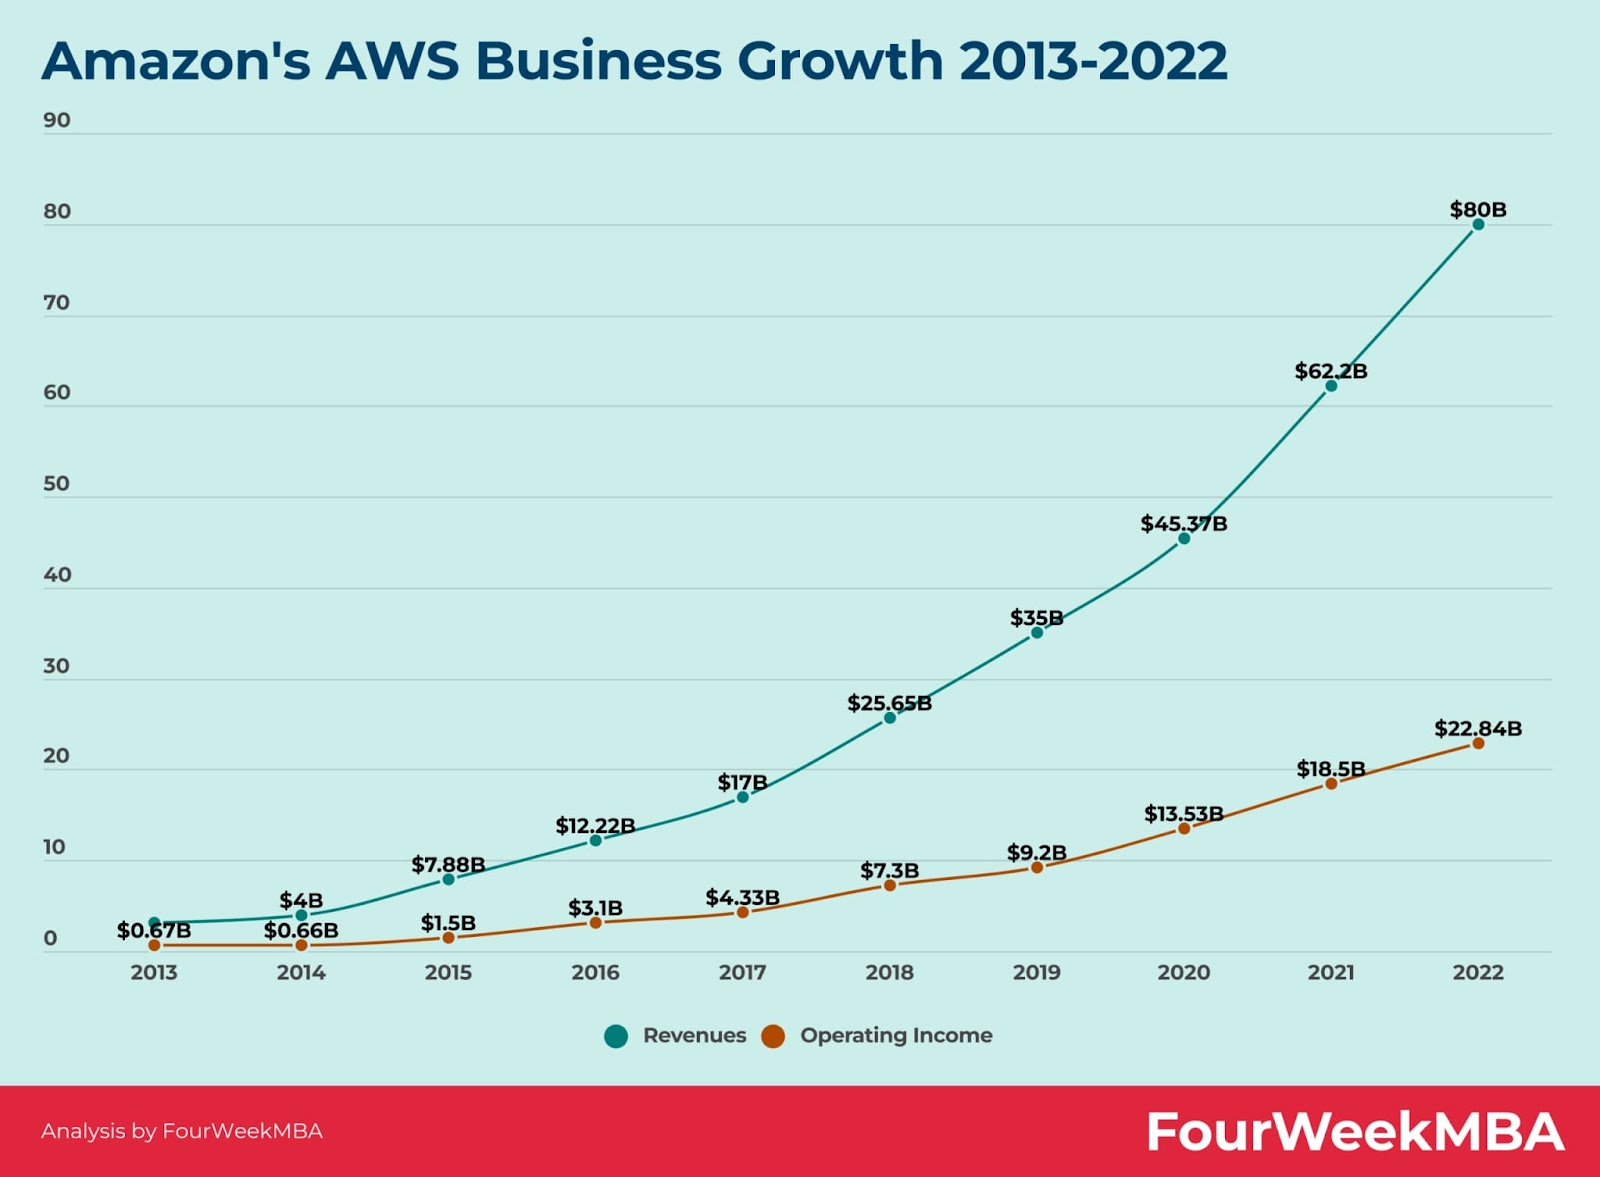 AWS business growth in 10 years